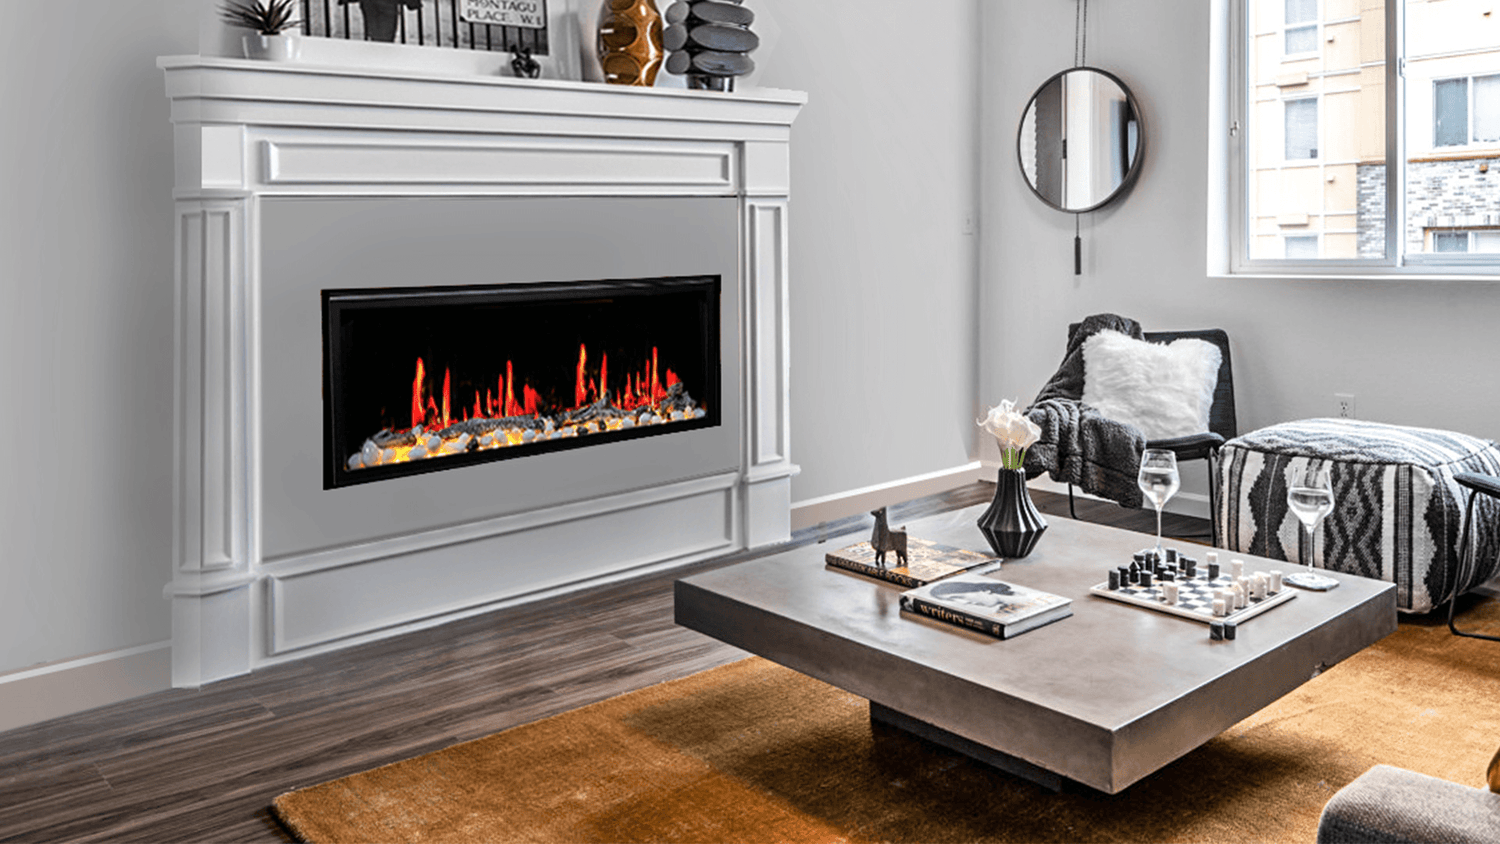 Built-In Electric Fireplace - ZopaFlame Fireplaces